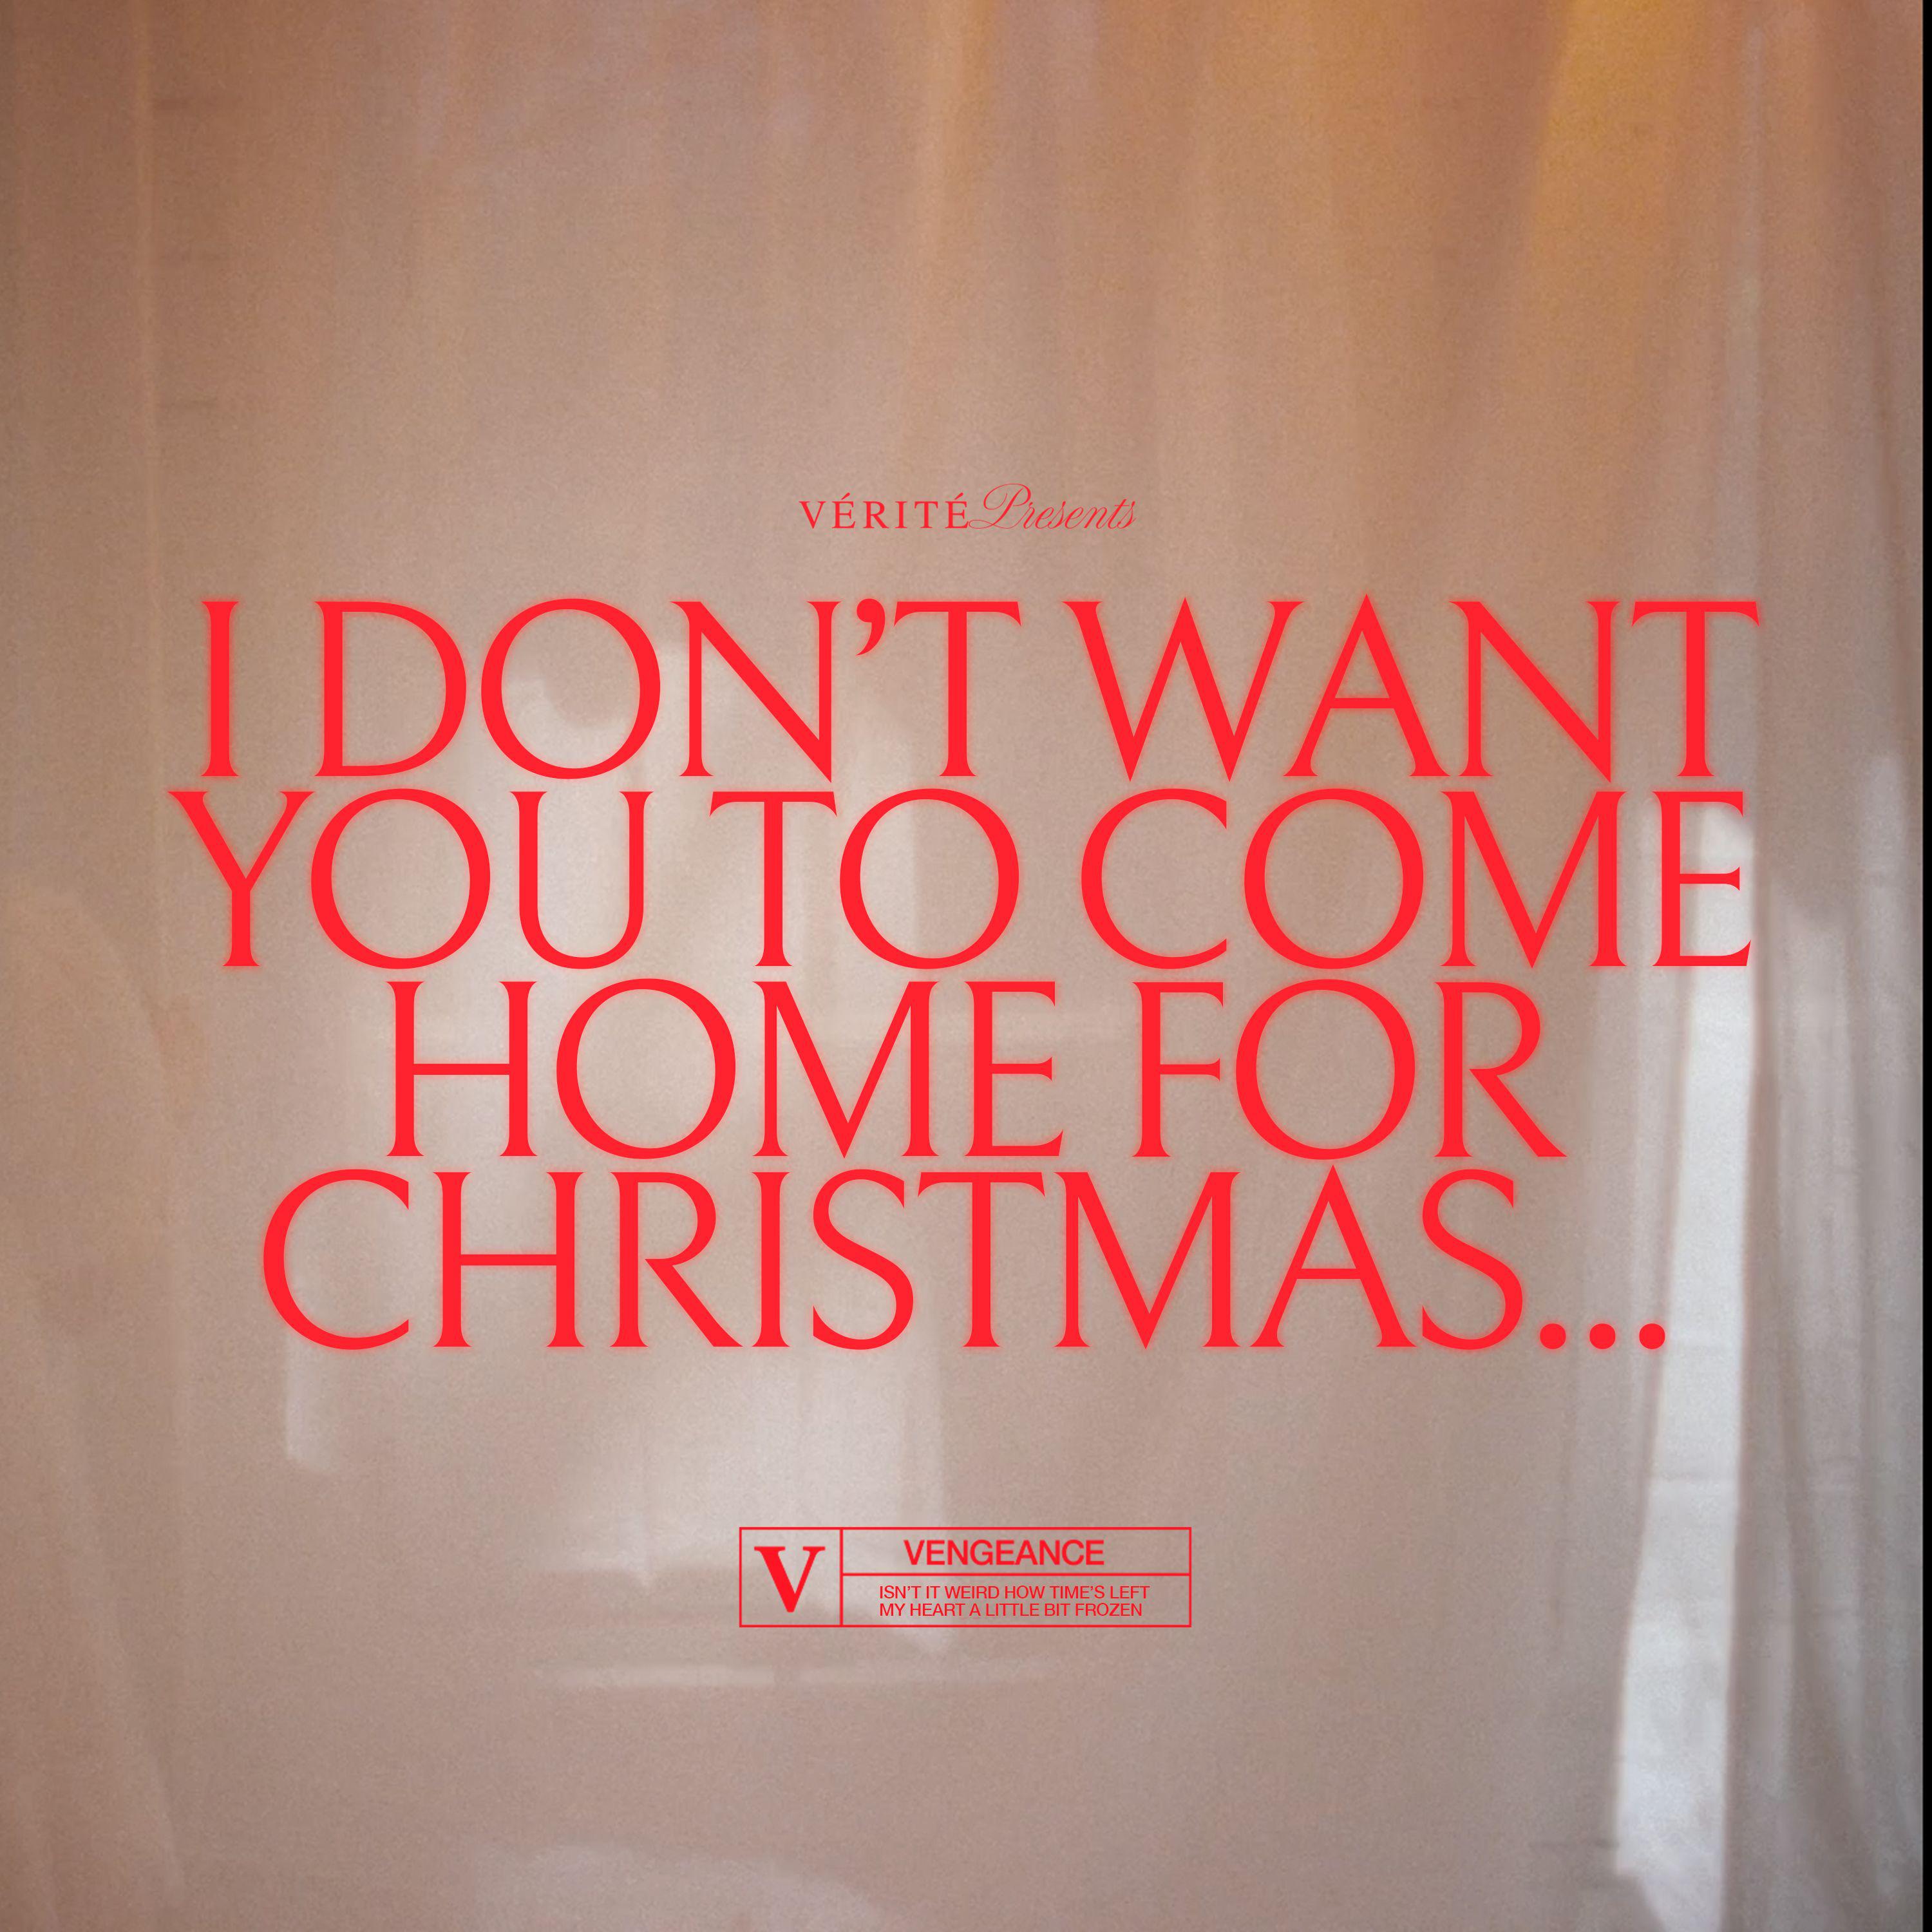 VÉRITÉ - i don't want you to come home for christmas (Official Video)